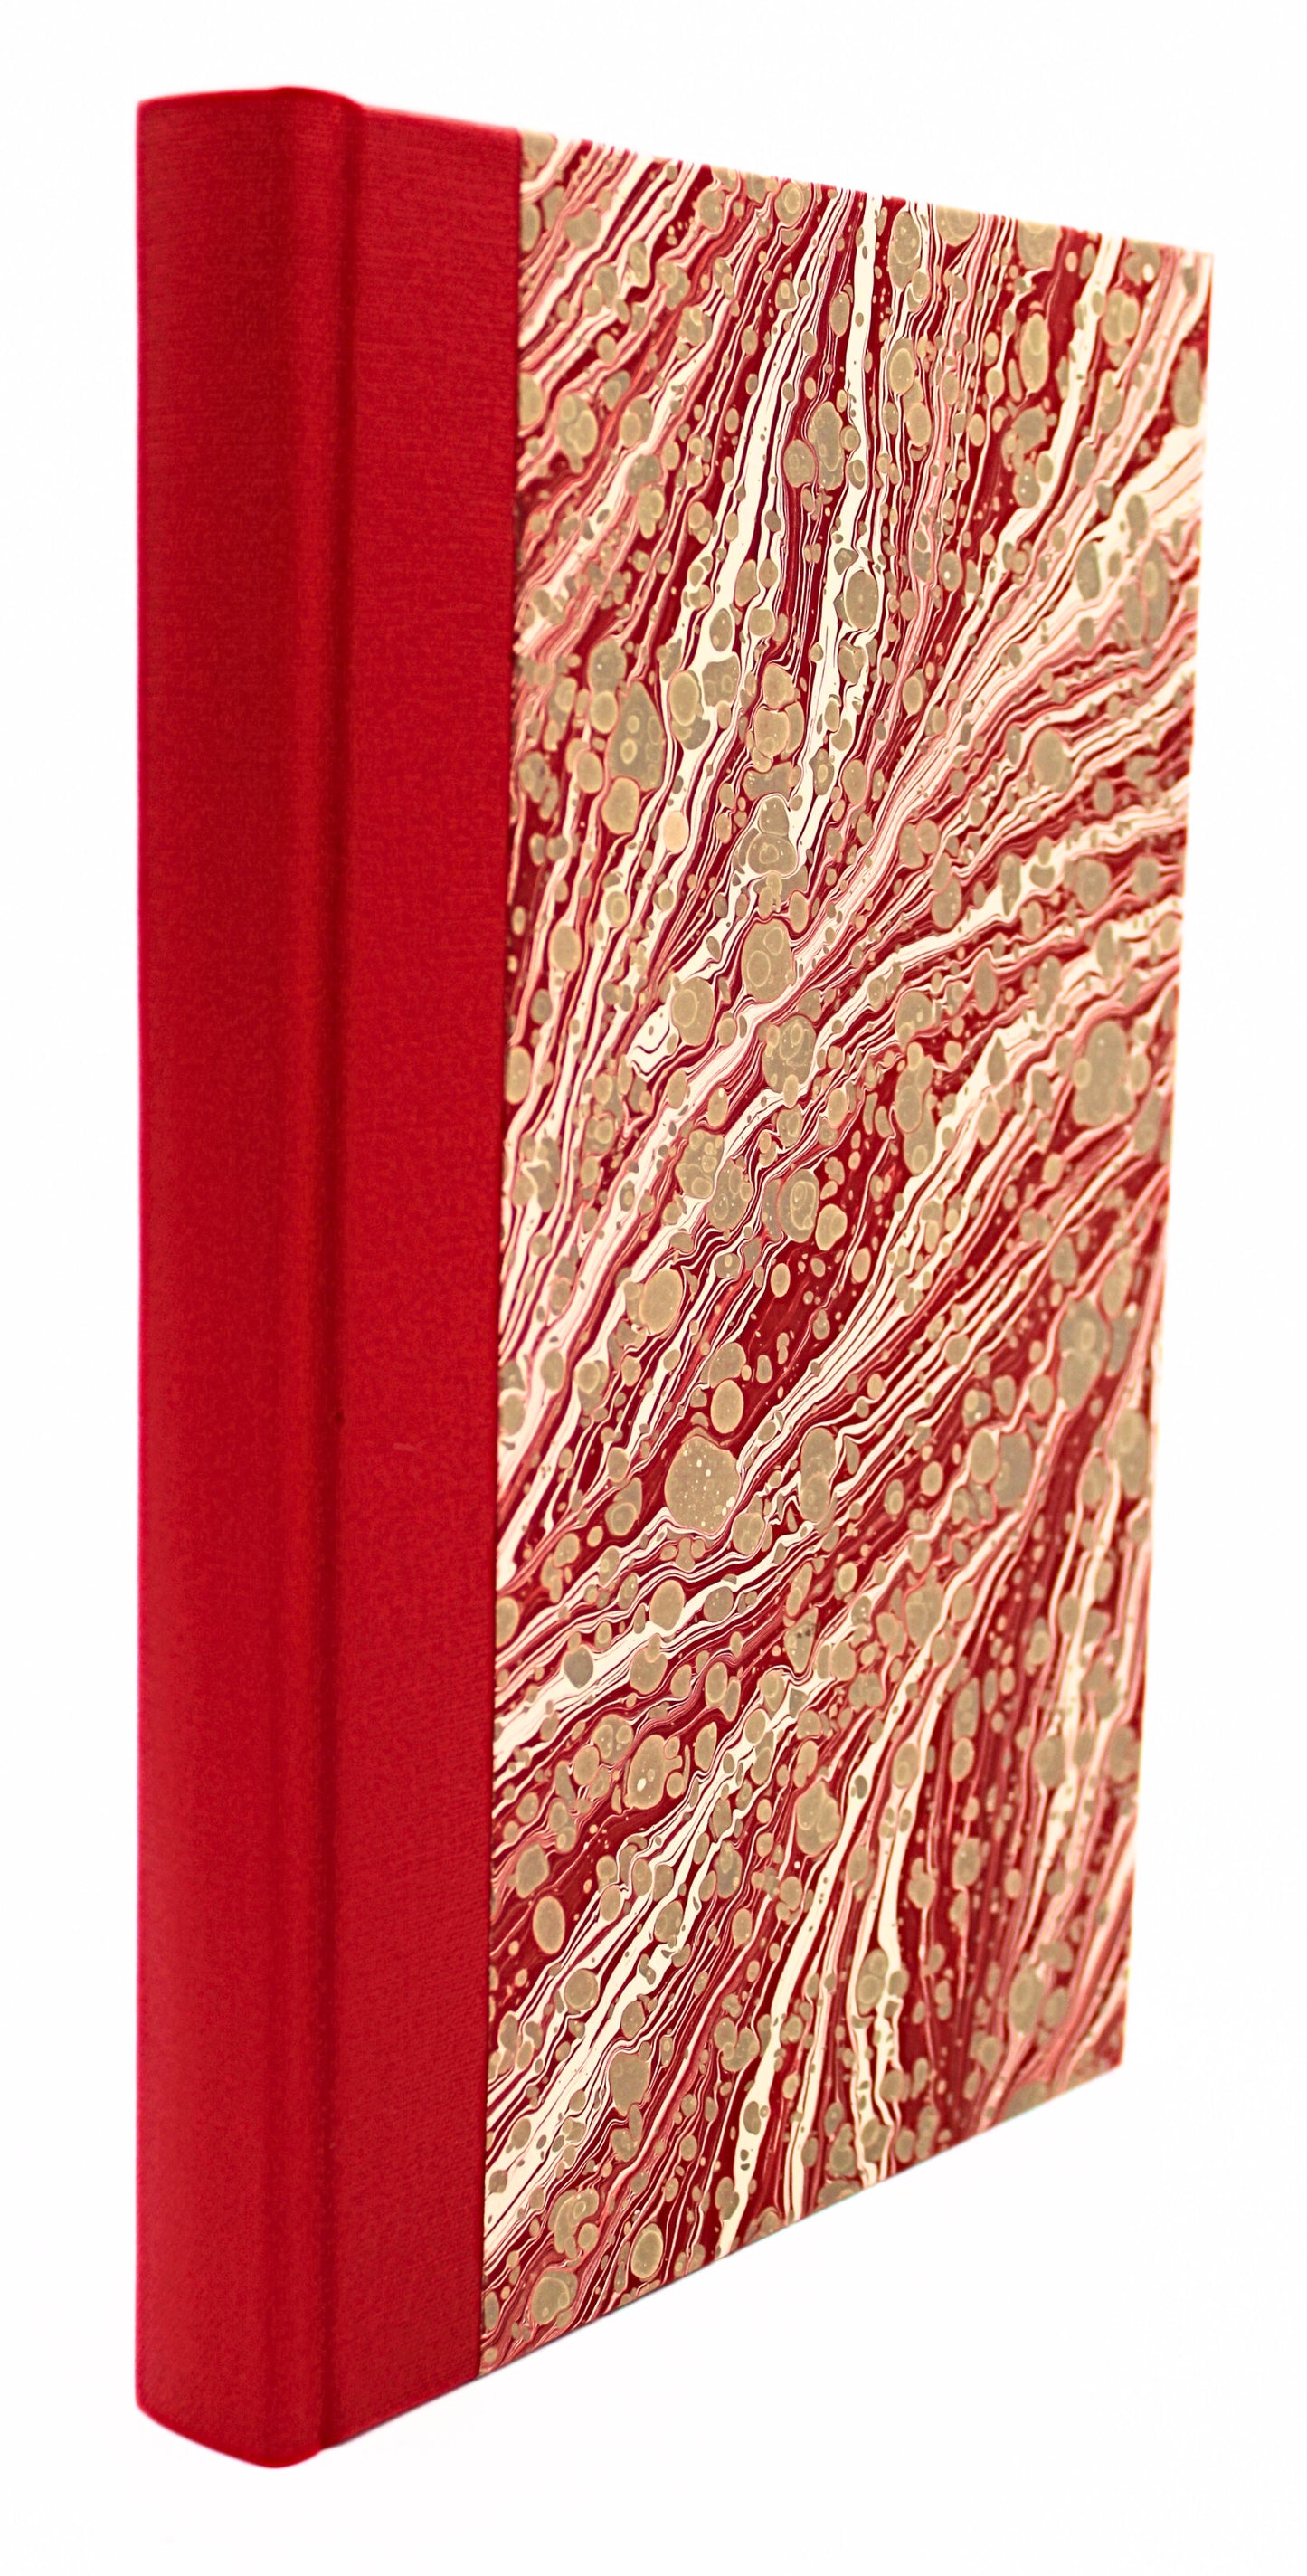 Hubert Bookbindery A5 Blank Notebook - Red Marbled Cover Side View